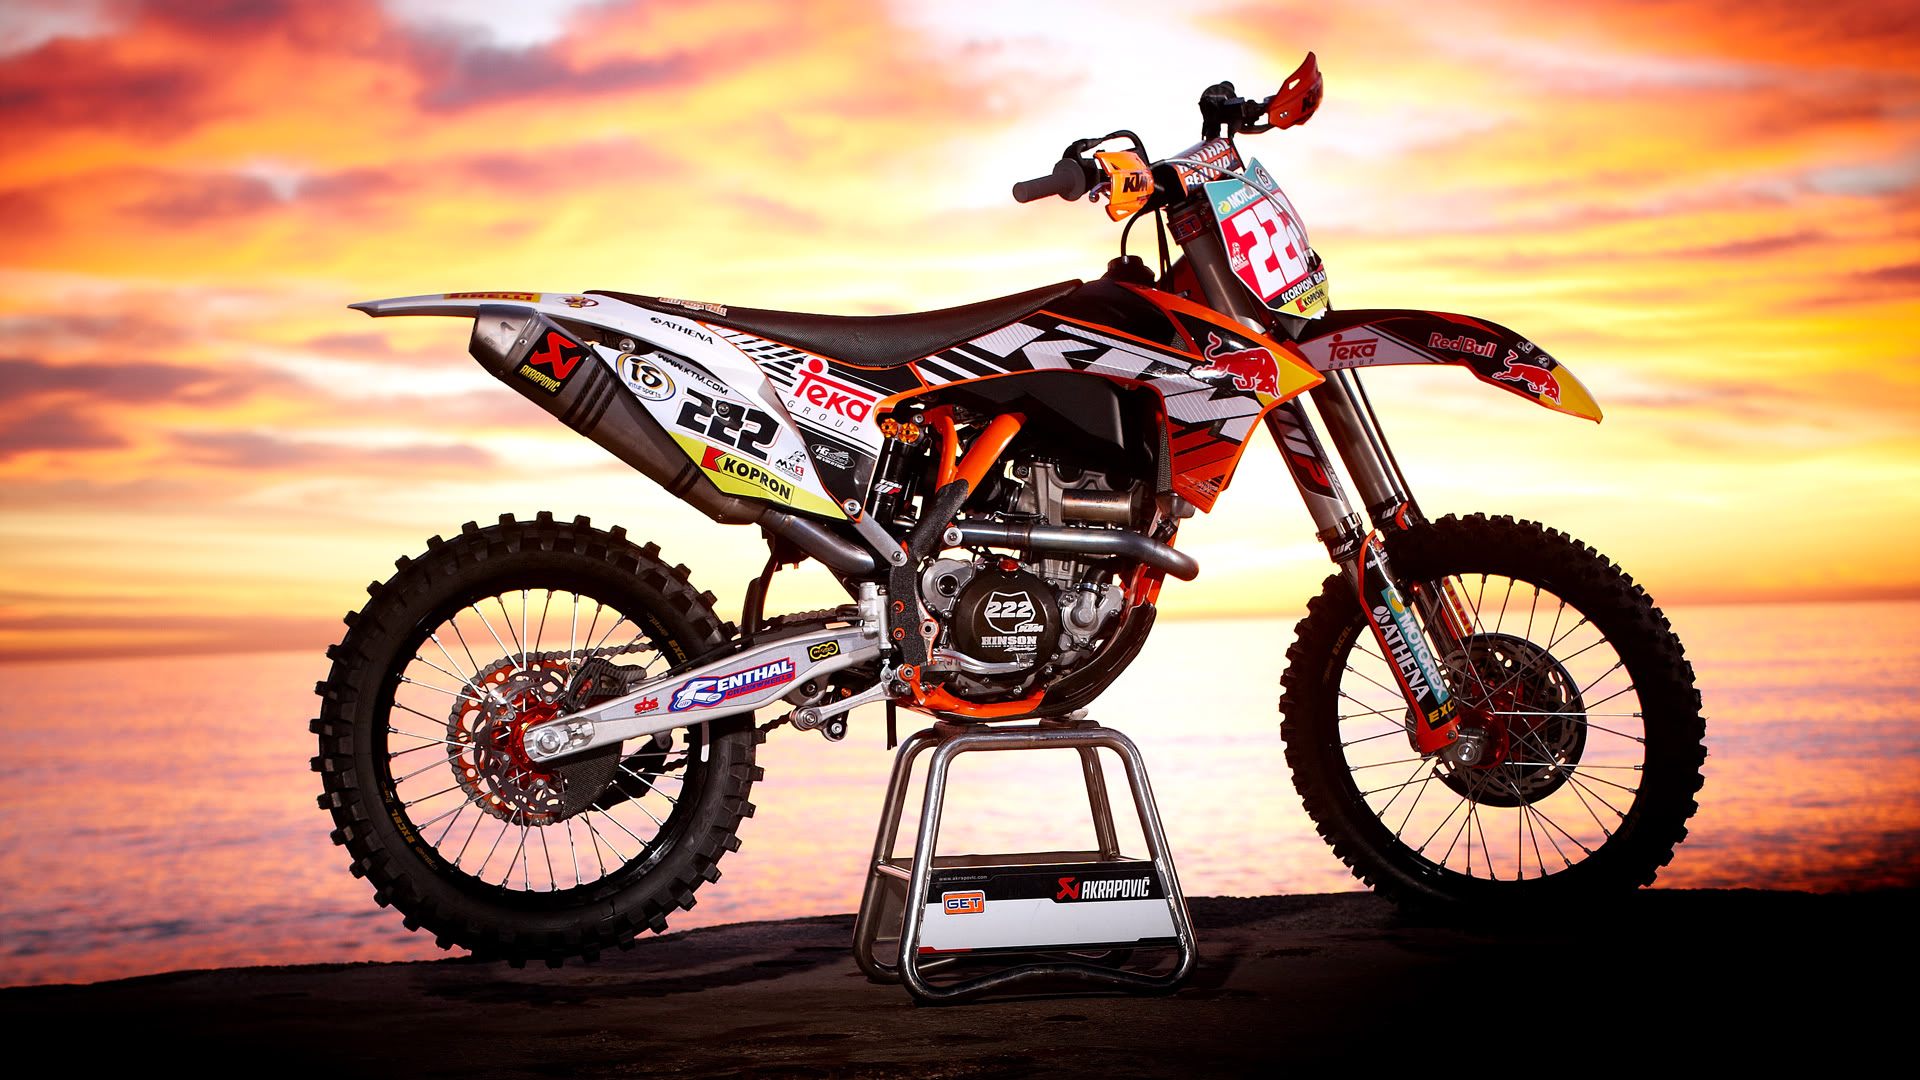 download the new for apple Sunset Bike Racing - Motocross